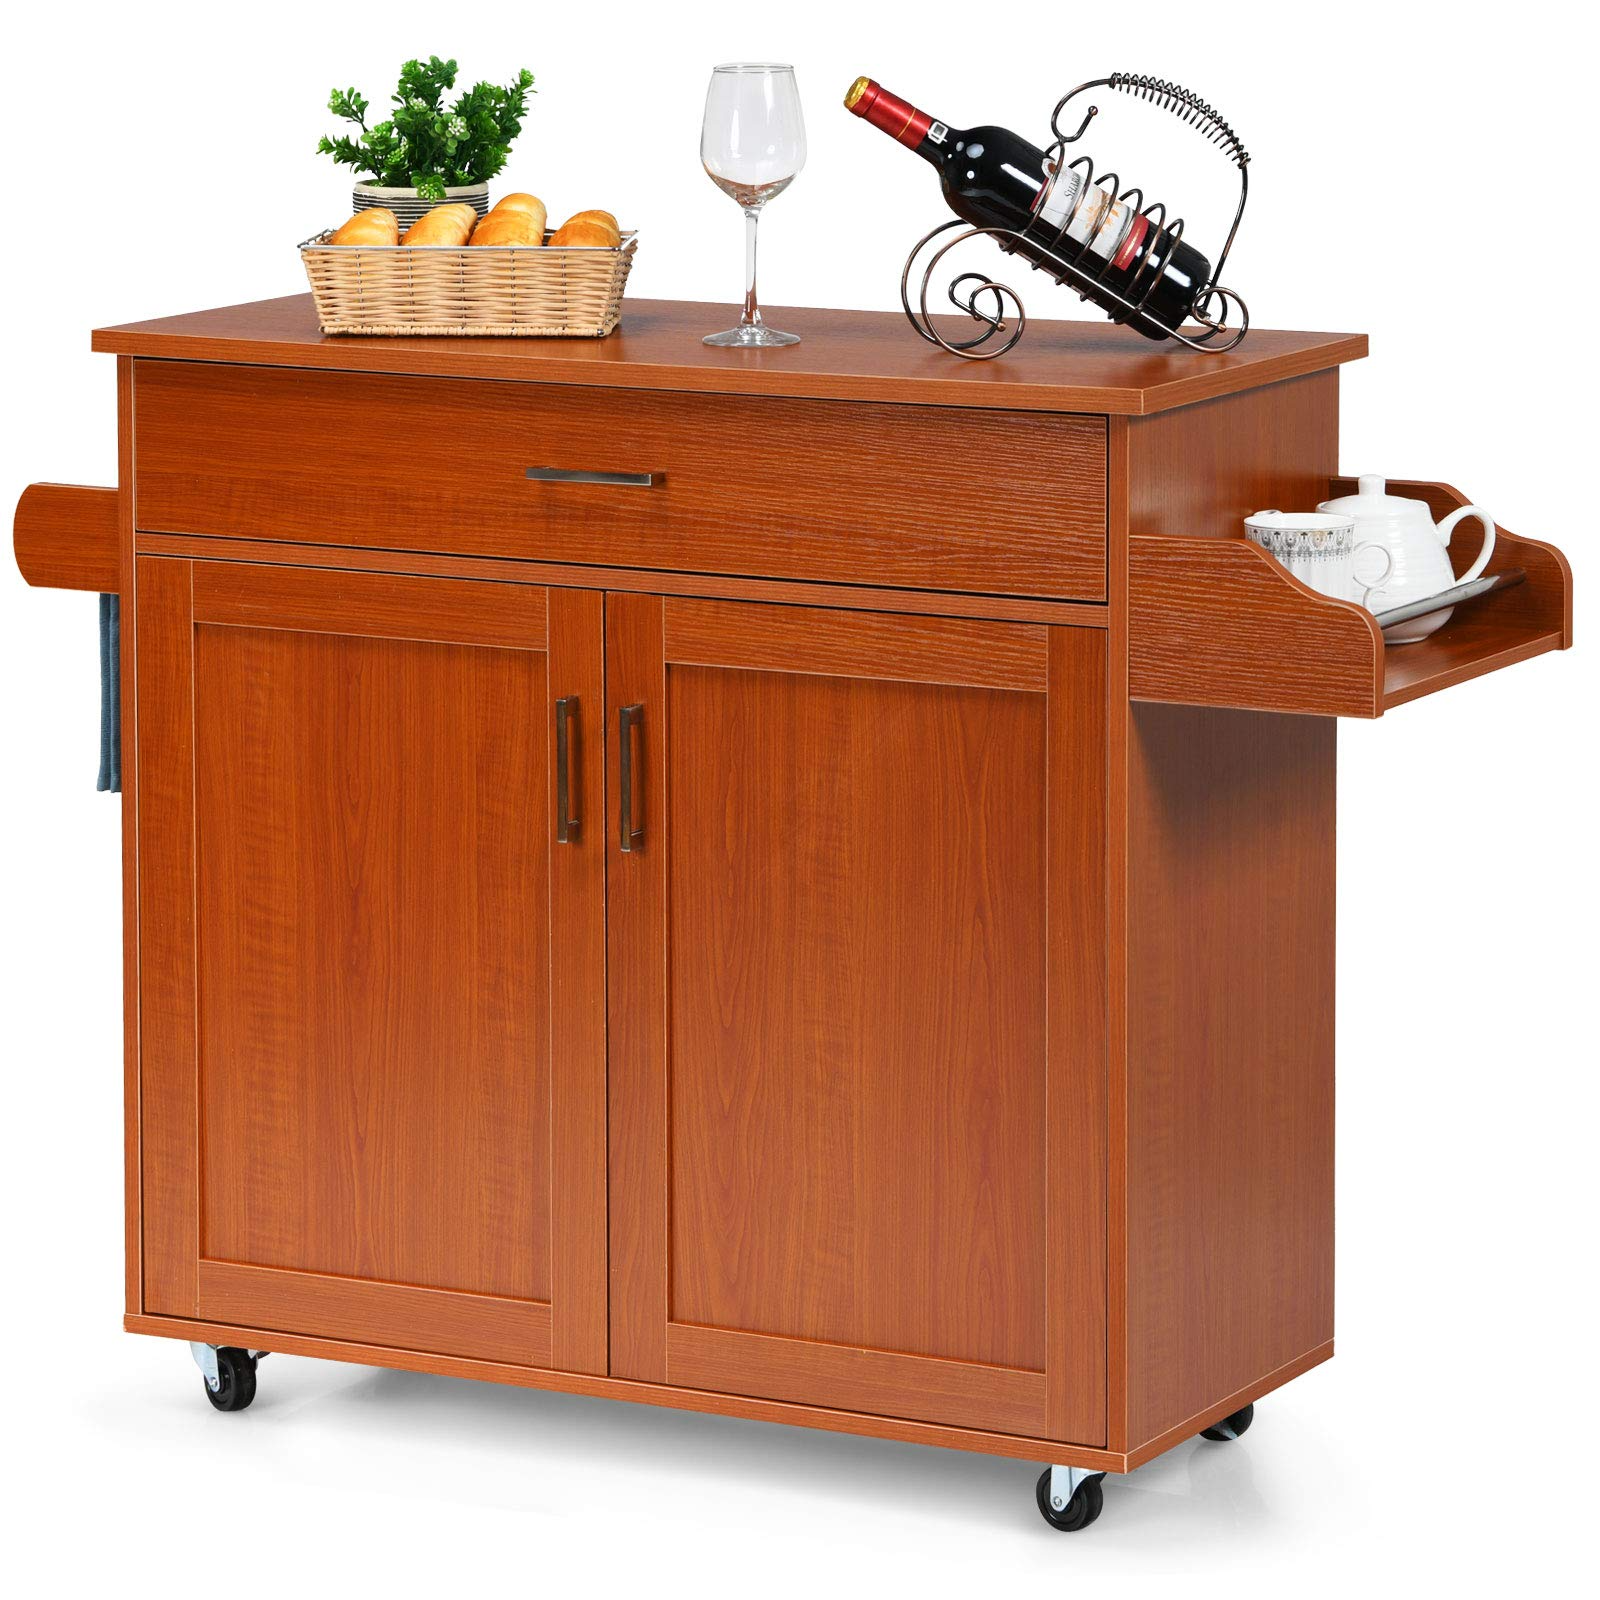 Giantex Kitchen Island, Rolling Kitchen Cart with Spice and Towel Rack, Large Drawer & 2-Door Storage Cabinet